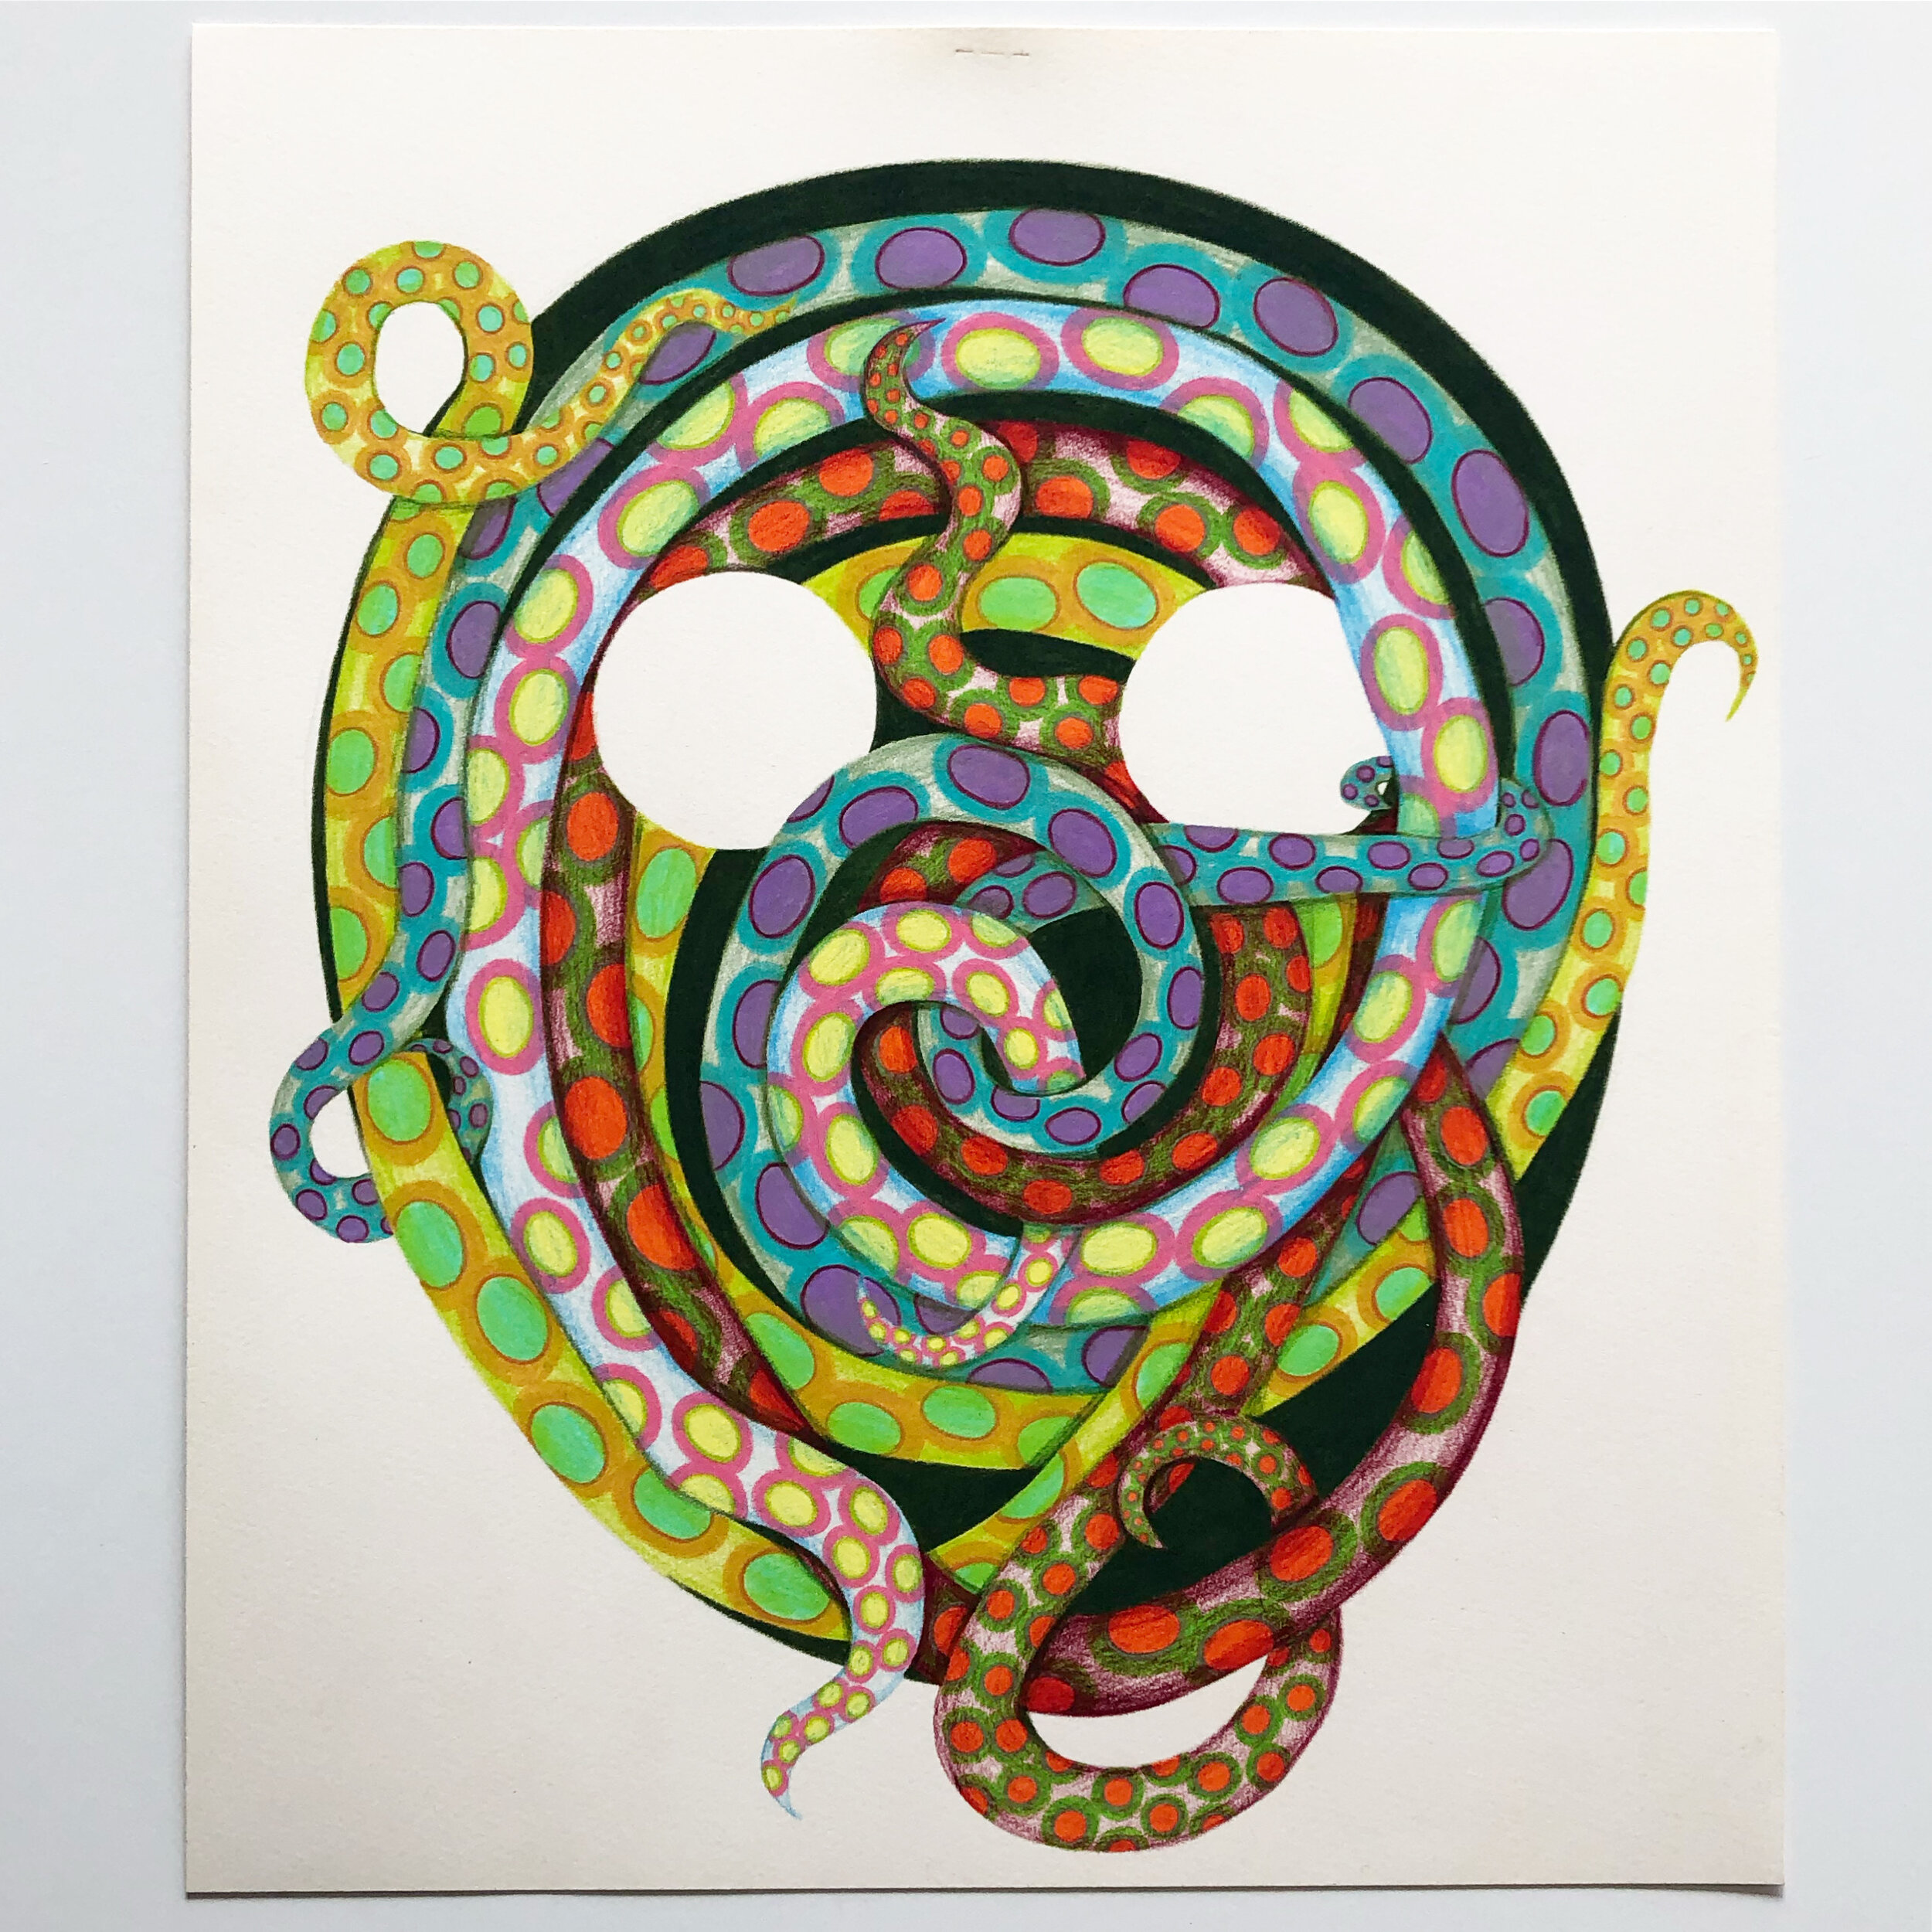 Mask with Snakes, 2020, colored pencil on paper, 15 1/4 x 13"